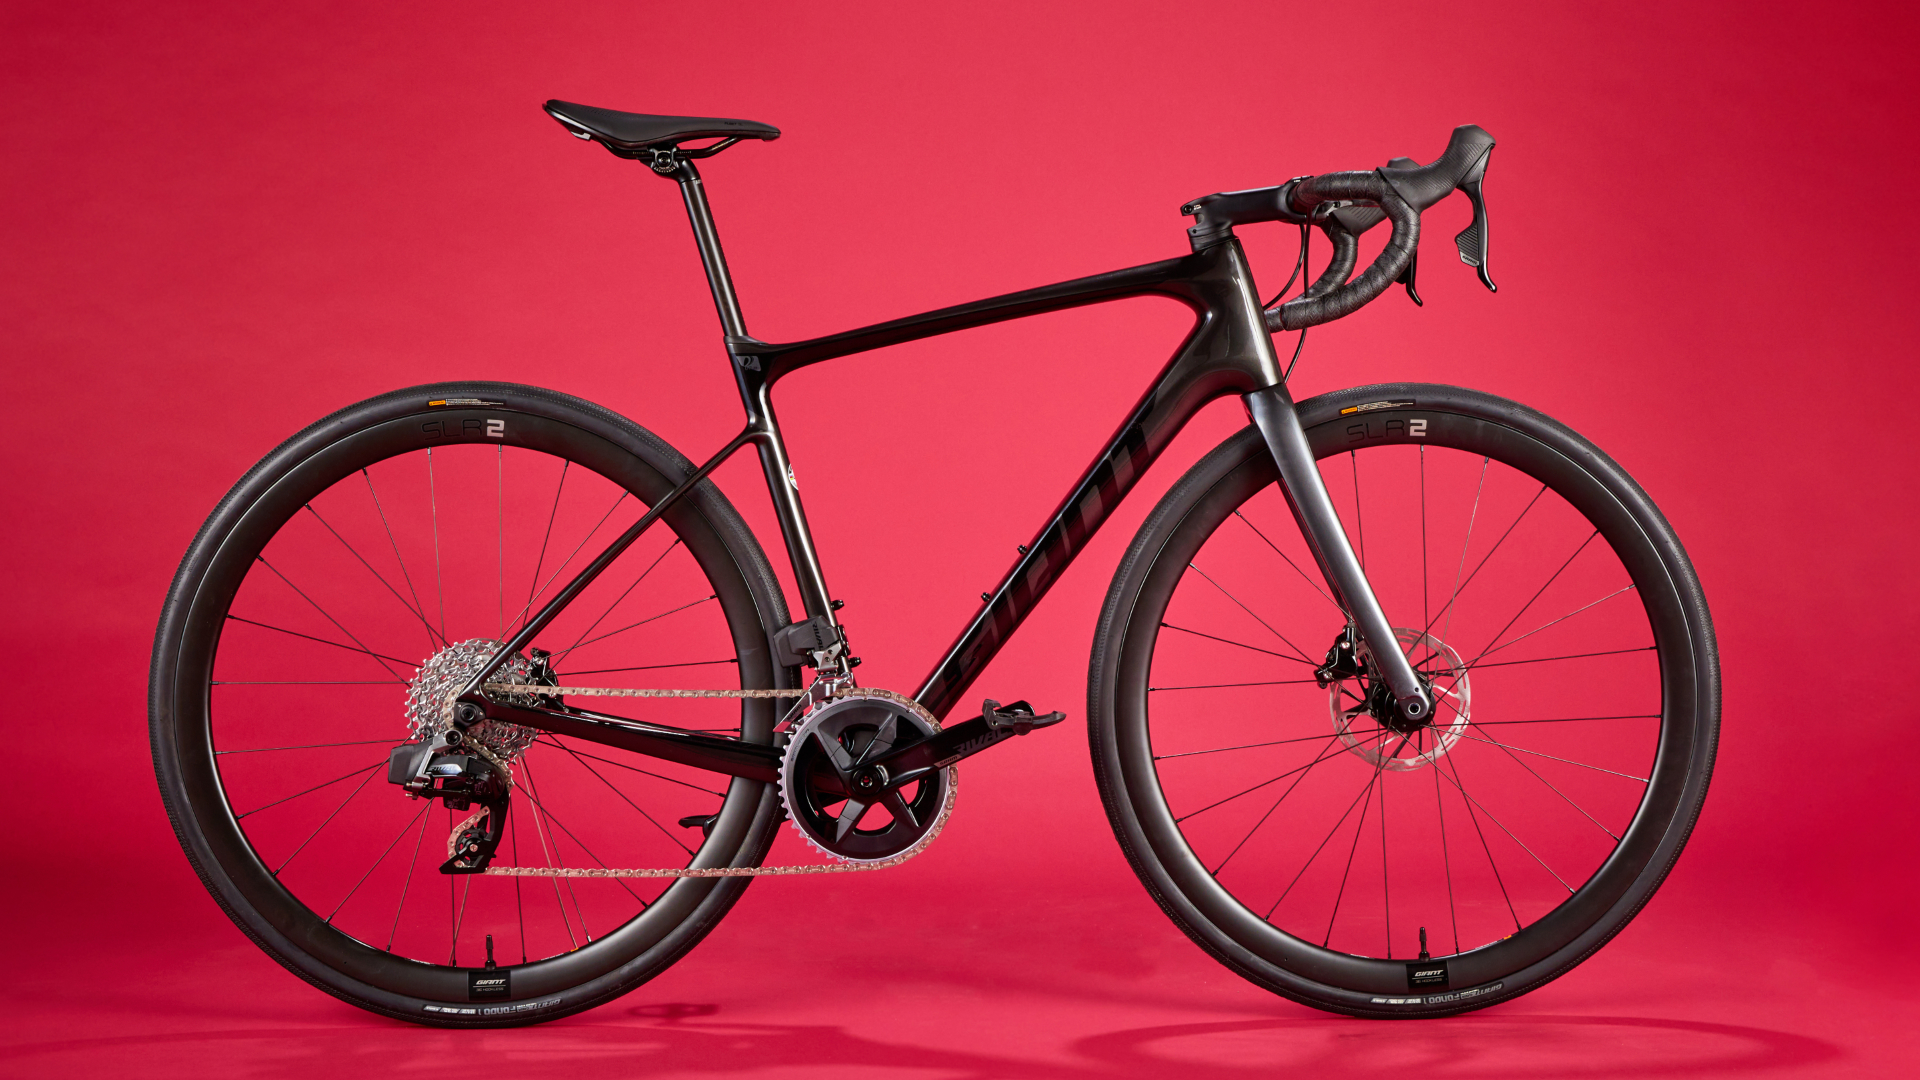 Giant Defy Advanced Pro 2 AX review | Cycling Weekly